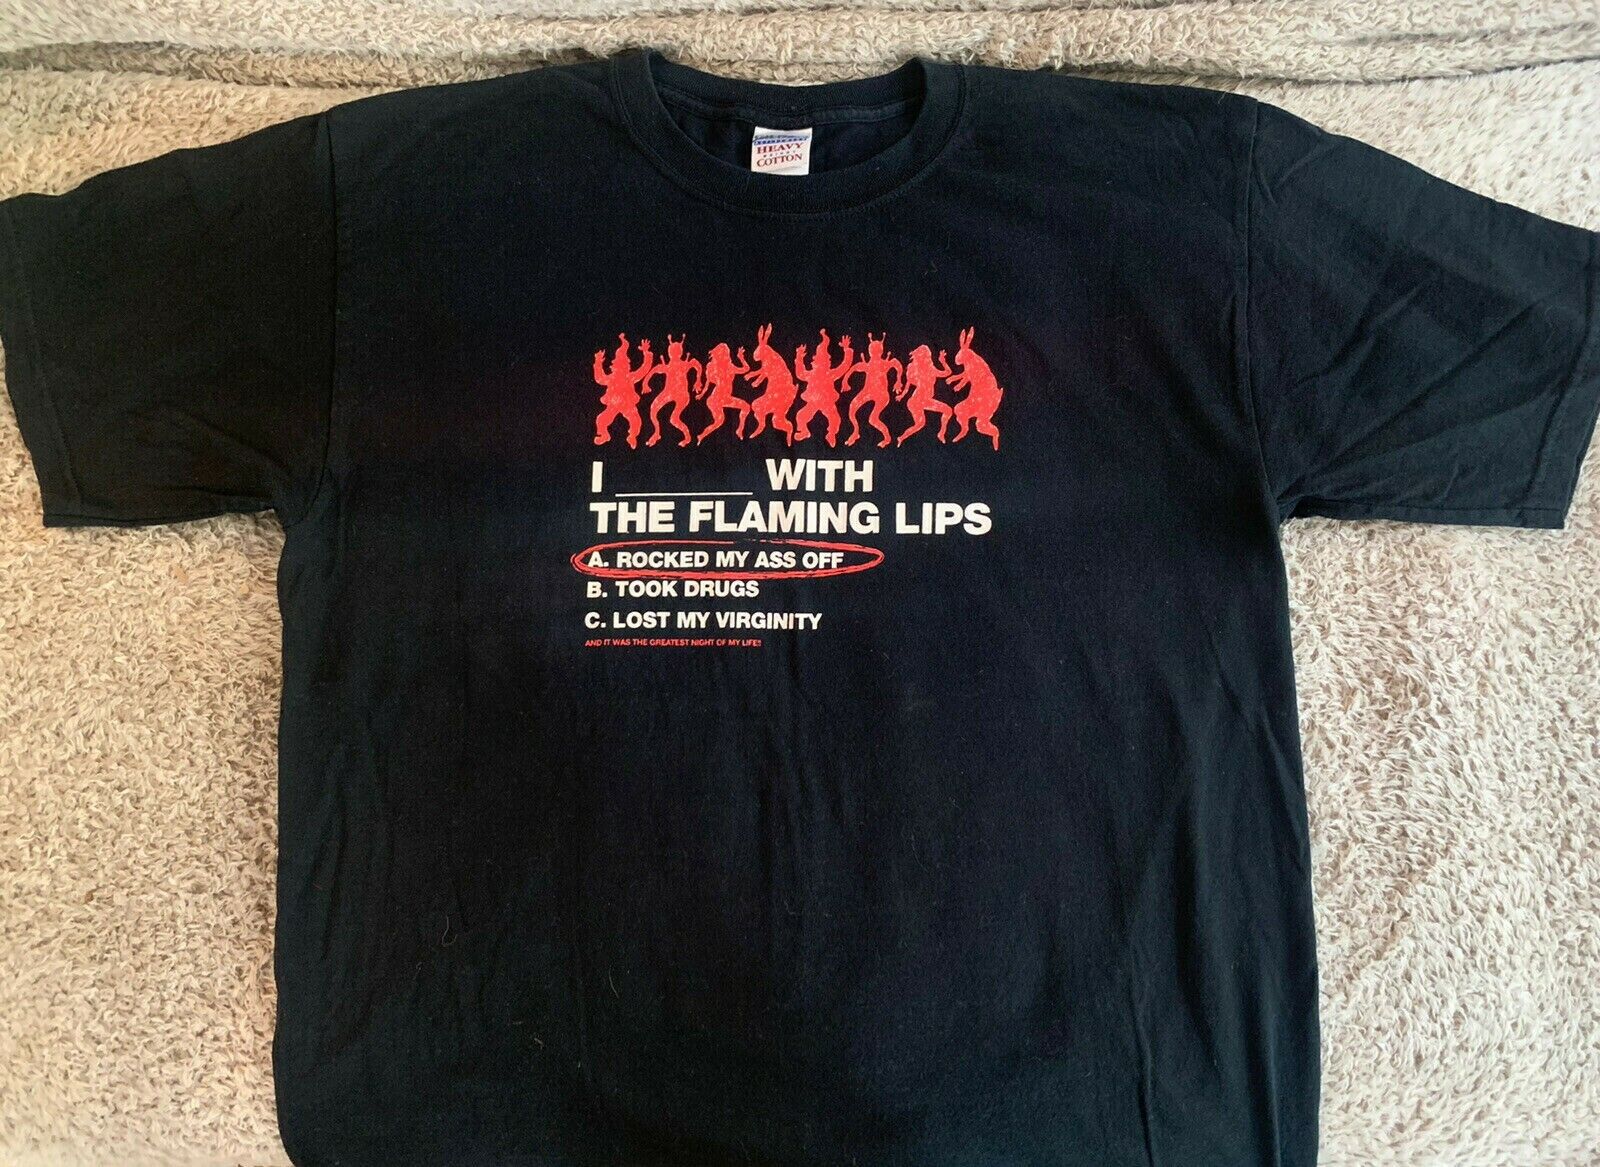 Vintage THE FLAMING LIPS 'I Rocked my A** Off' T-Shirt - Size Mens L - Black